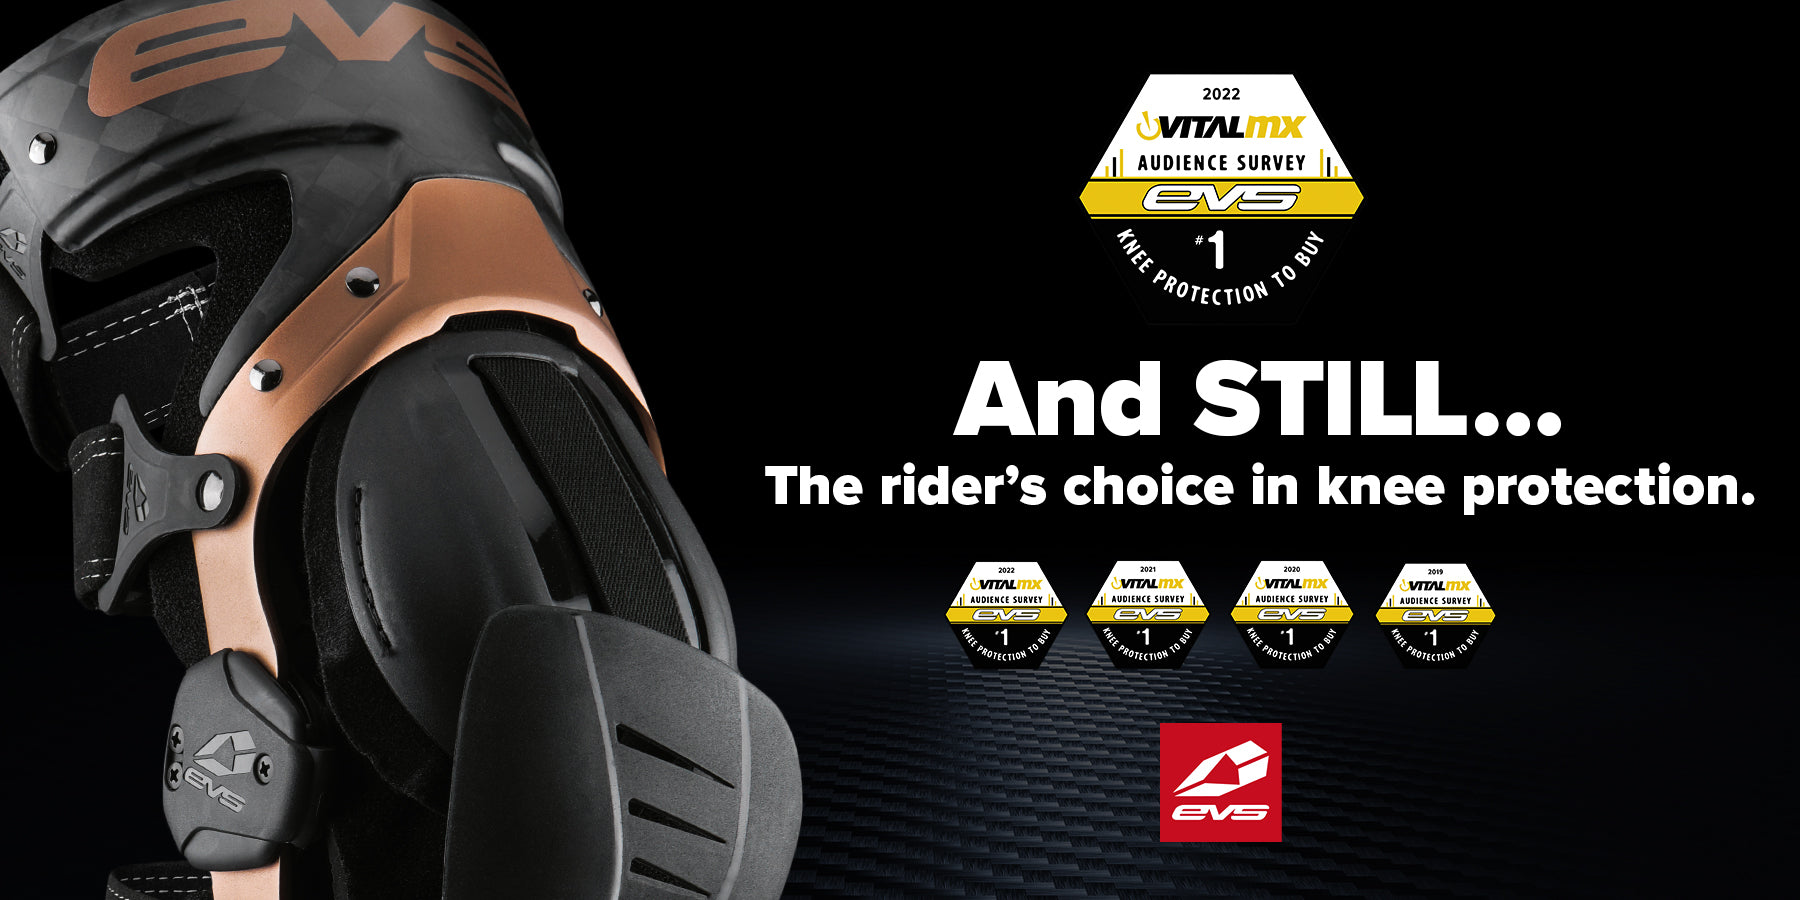 EVS Knee Braces: Still the Rider's Choice in Knee Protection